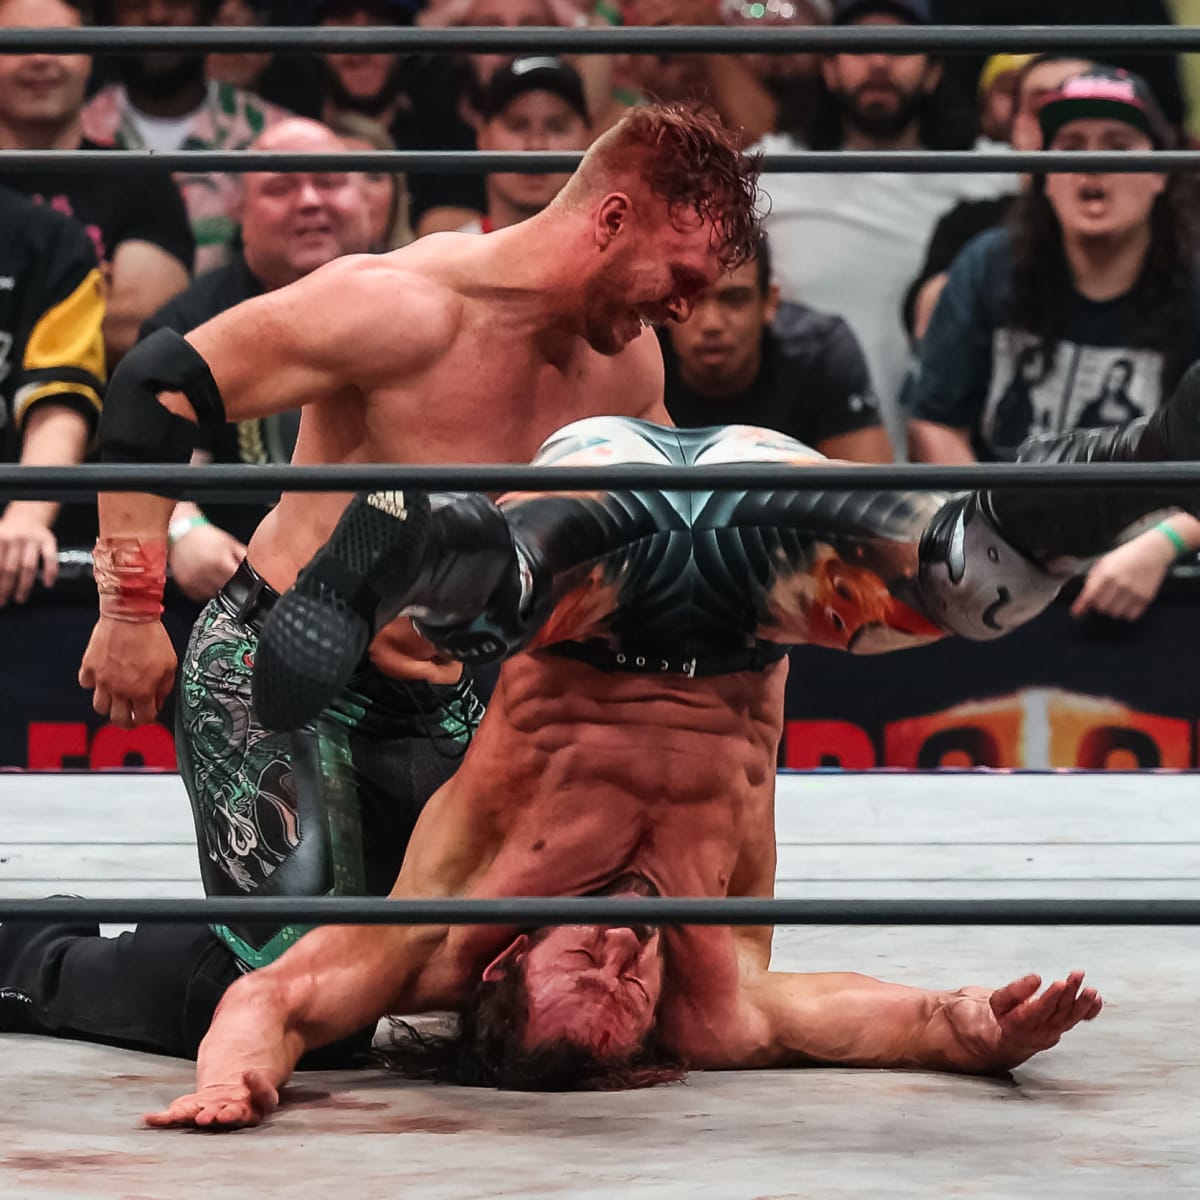 Kenny Omega responds to criticism of Will Ospreay match - Sports Illustrated